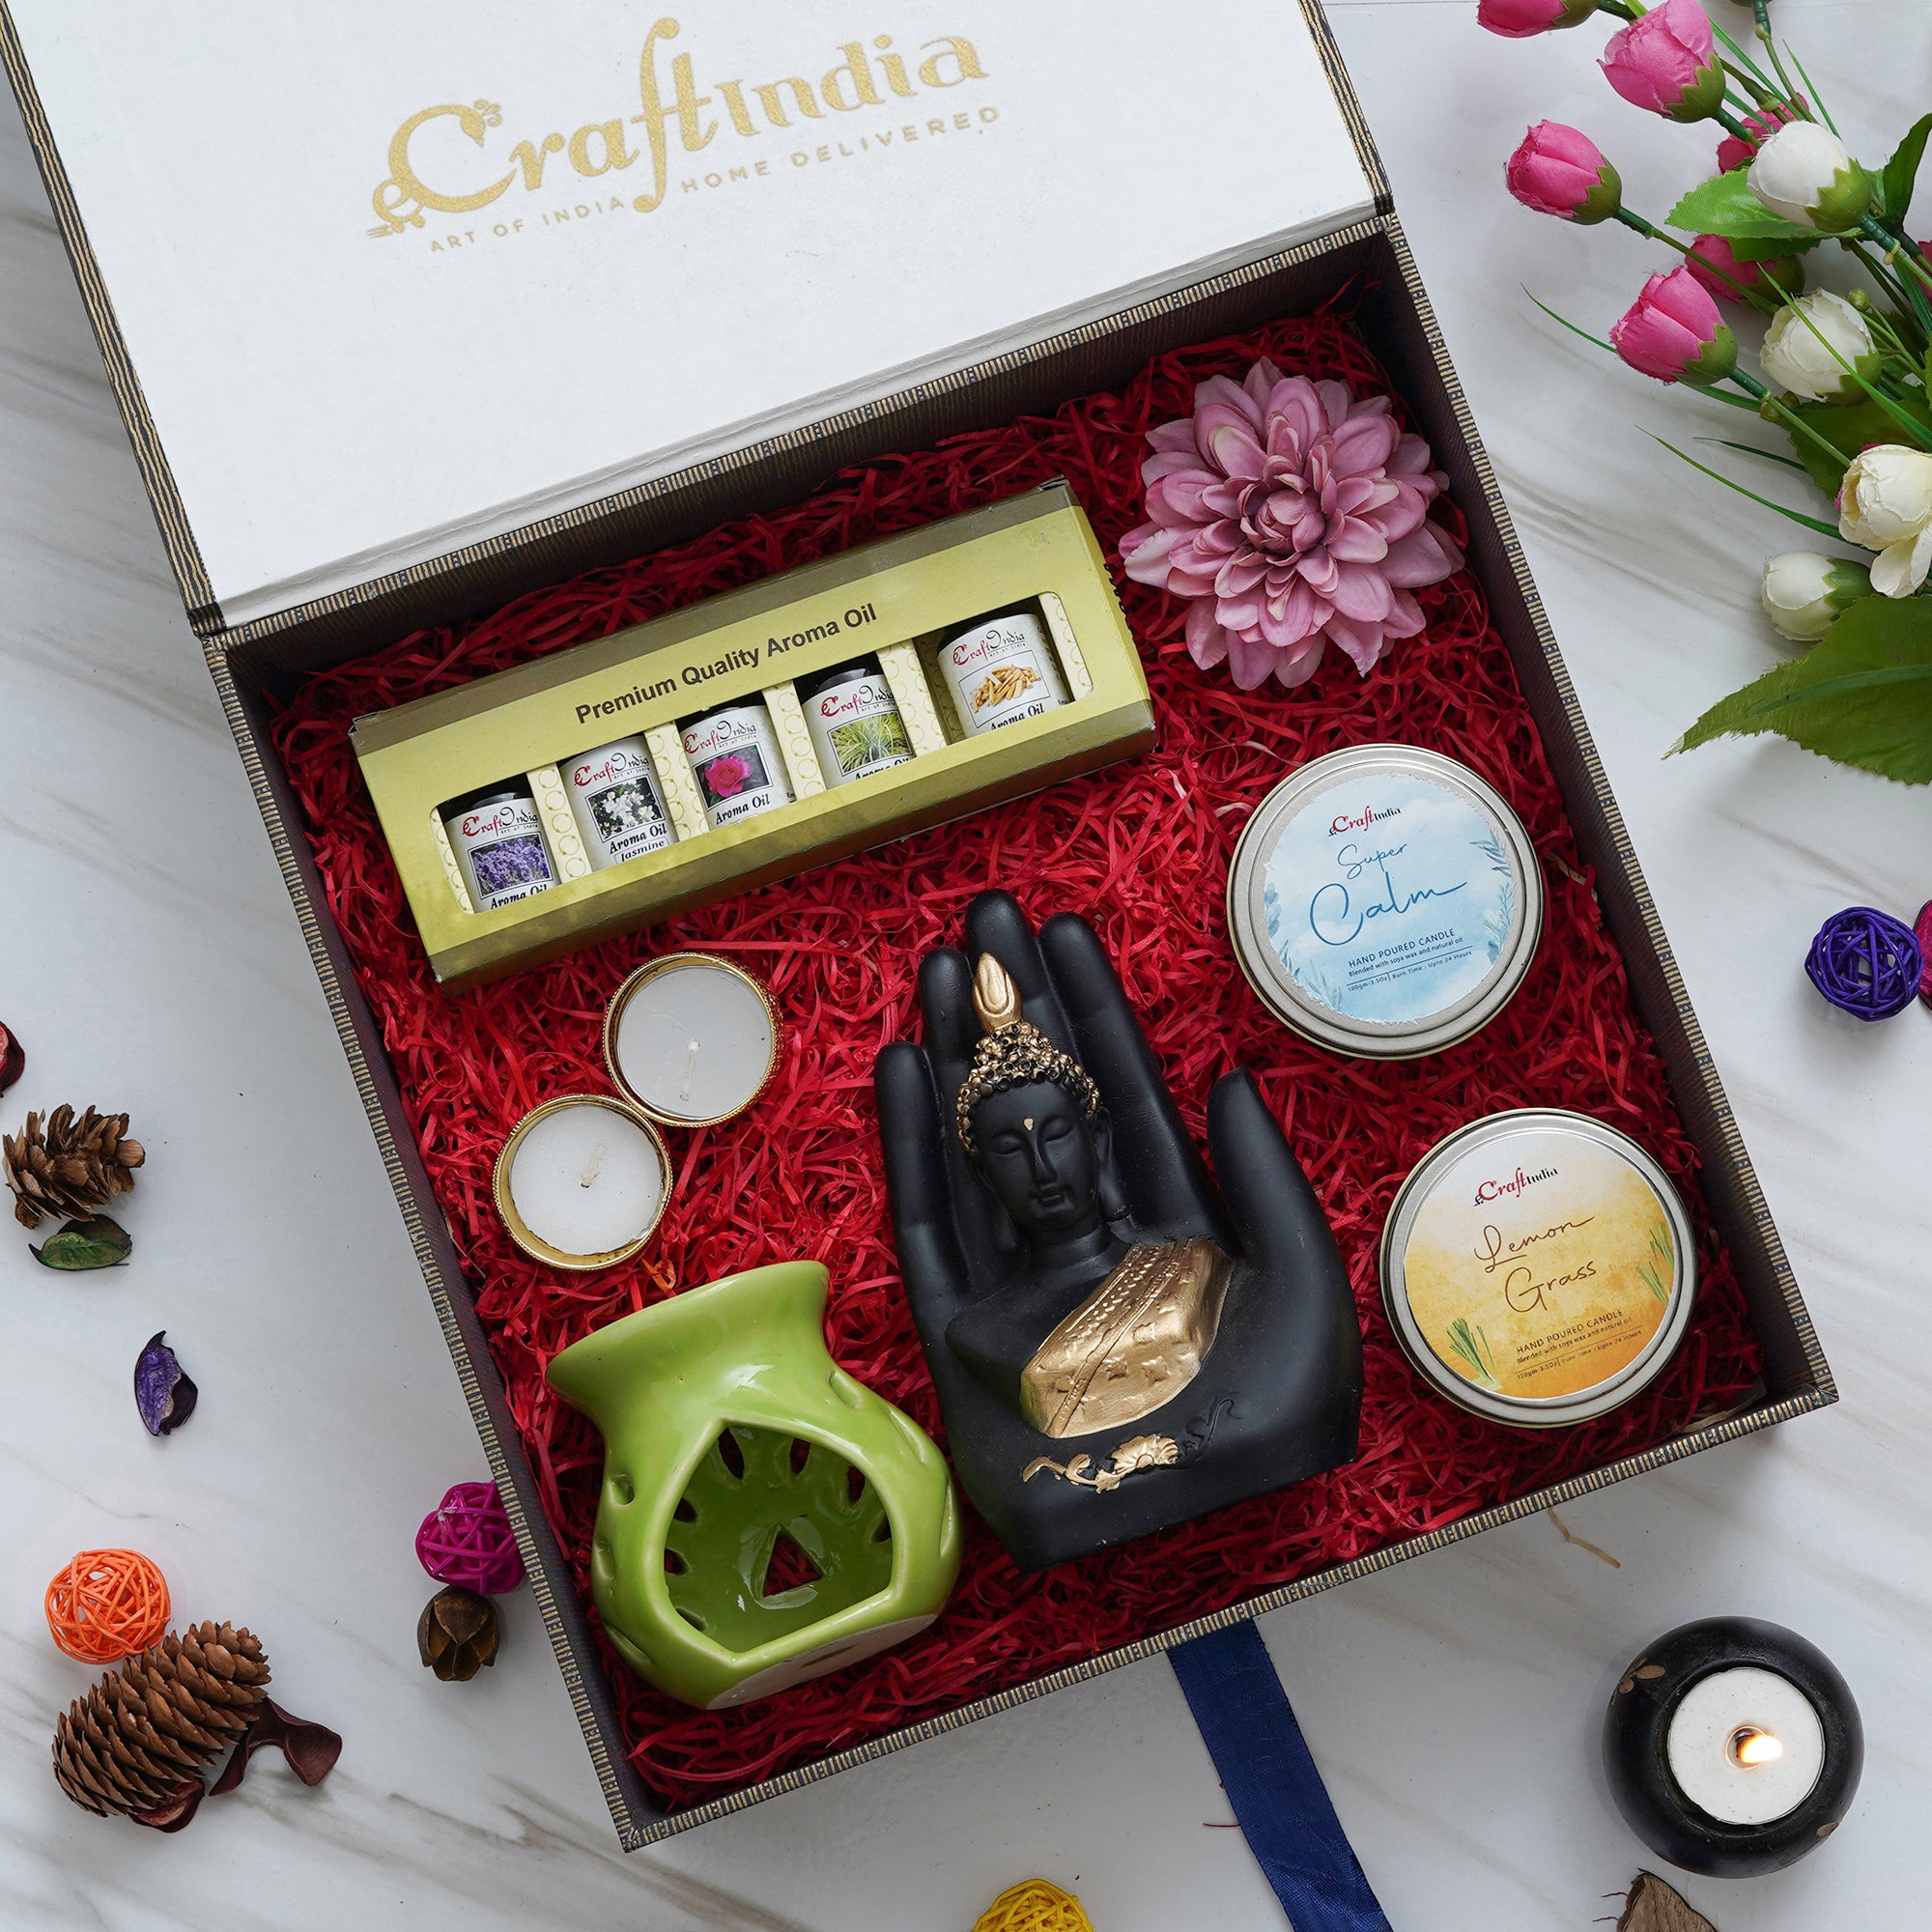 eCraftIndia The Thoughtful Gift Box - Black and Golden Handcrafted Palm Buddha Statue, Set of 5 Lavender, Jasmine, Rose, Lemon Grass, Sandalwood Aroma Oils, Aroma Diffuser, 2 Tea Light Candle Holders, Super Calm, Lemon Grass Hand Poured Soya Wax Candles